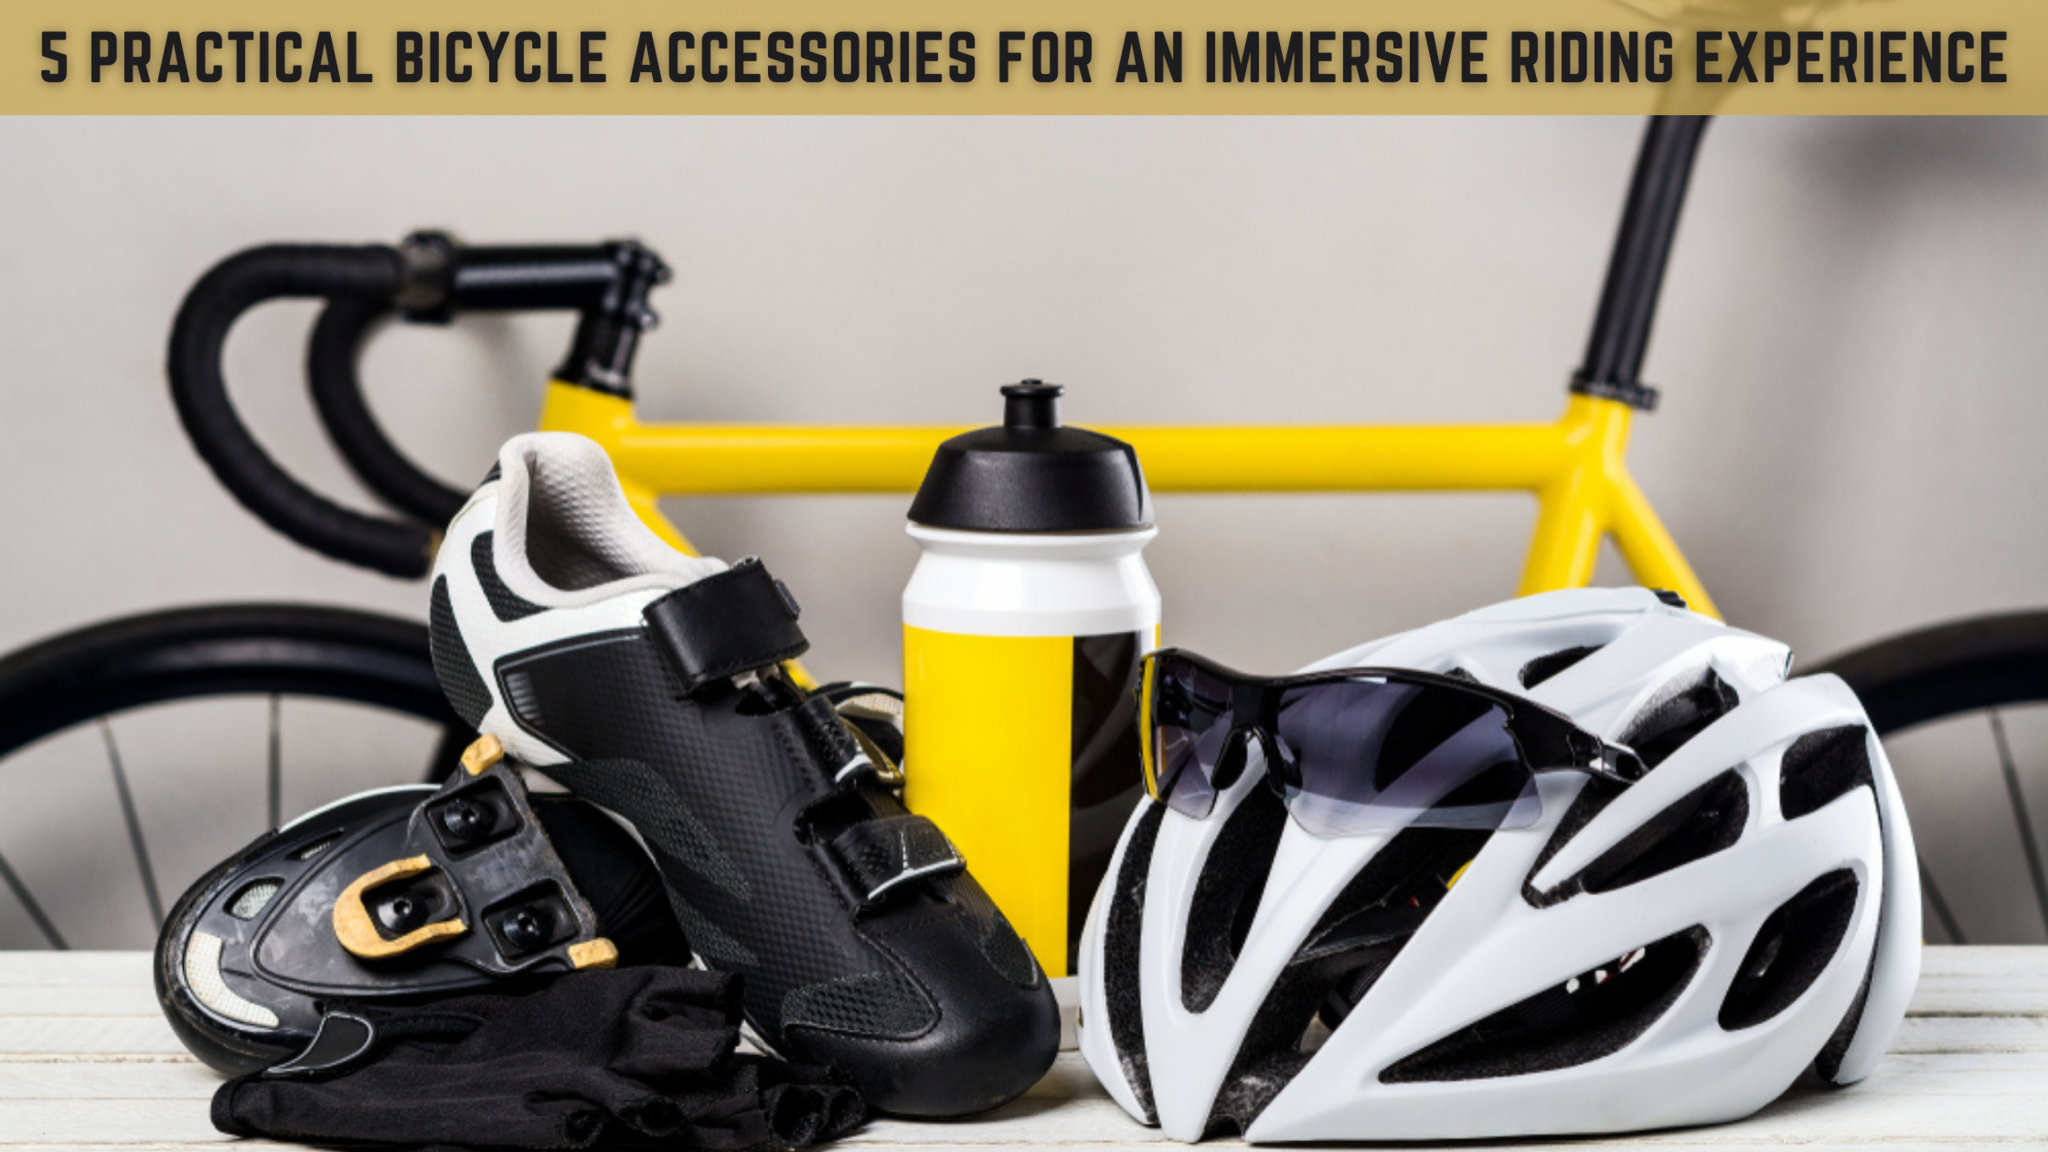 5 Practical Bicycle Accessories For An Immersive Riding Experience